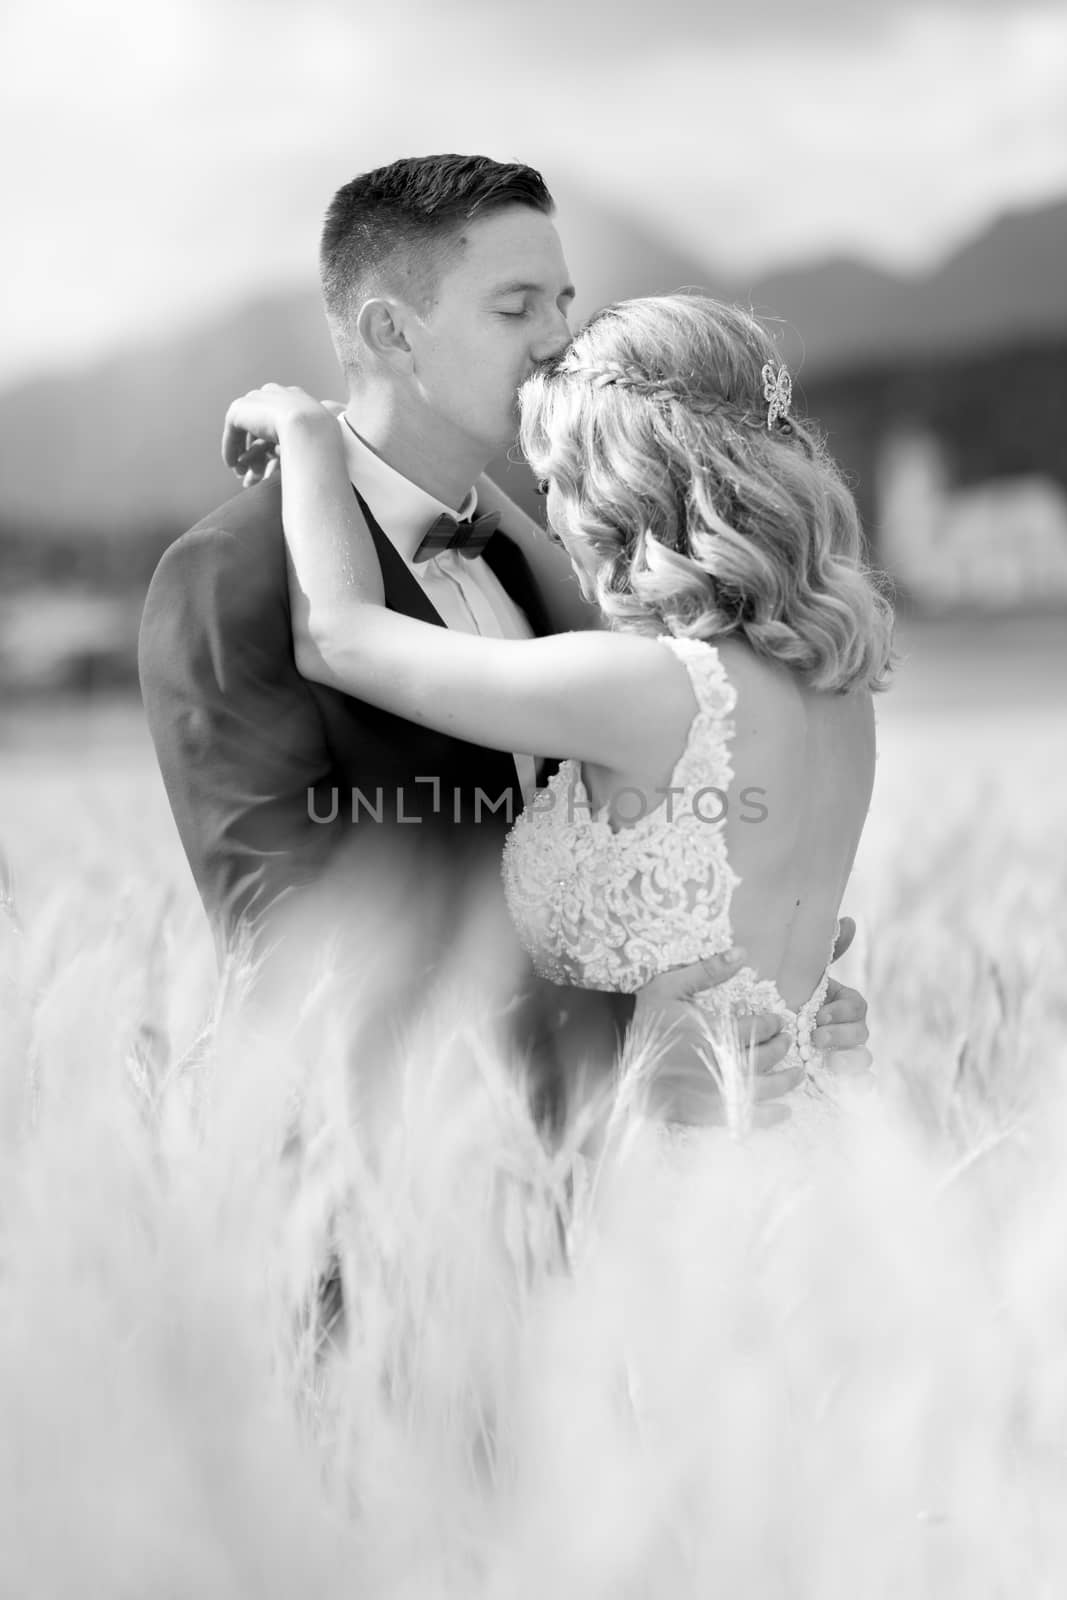 Groom hugging bride tenderly and kisses her on forehead in wheat field somewhere in Slovenian countryside. Caucasian happy romantic young couple celebrating their marriage. Black and white photo.